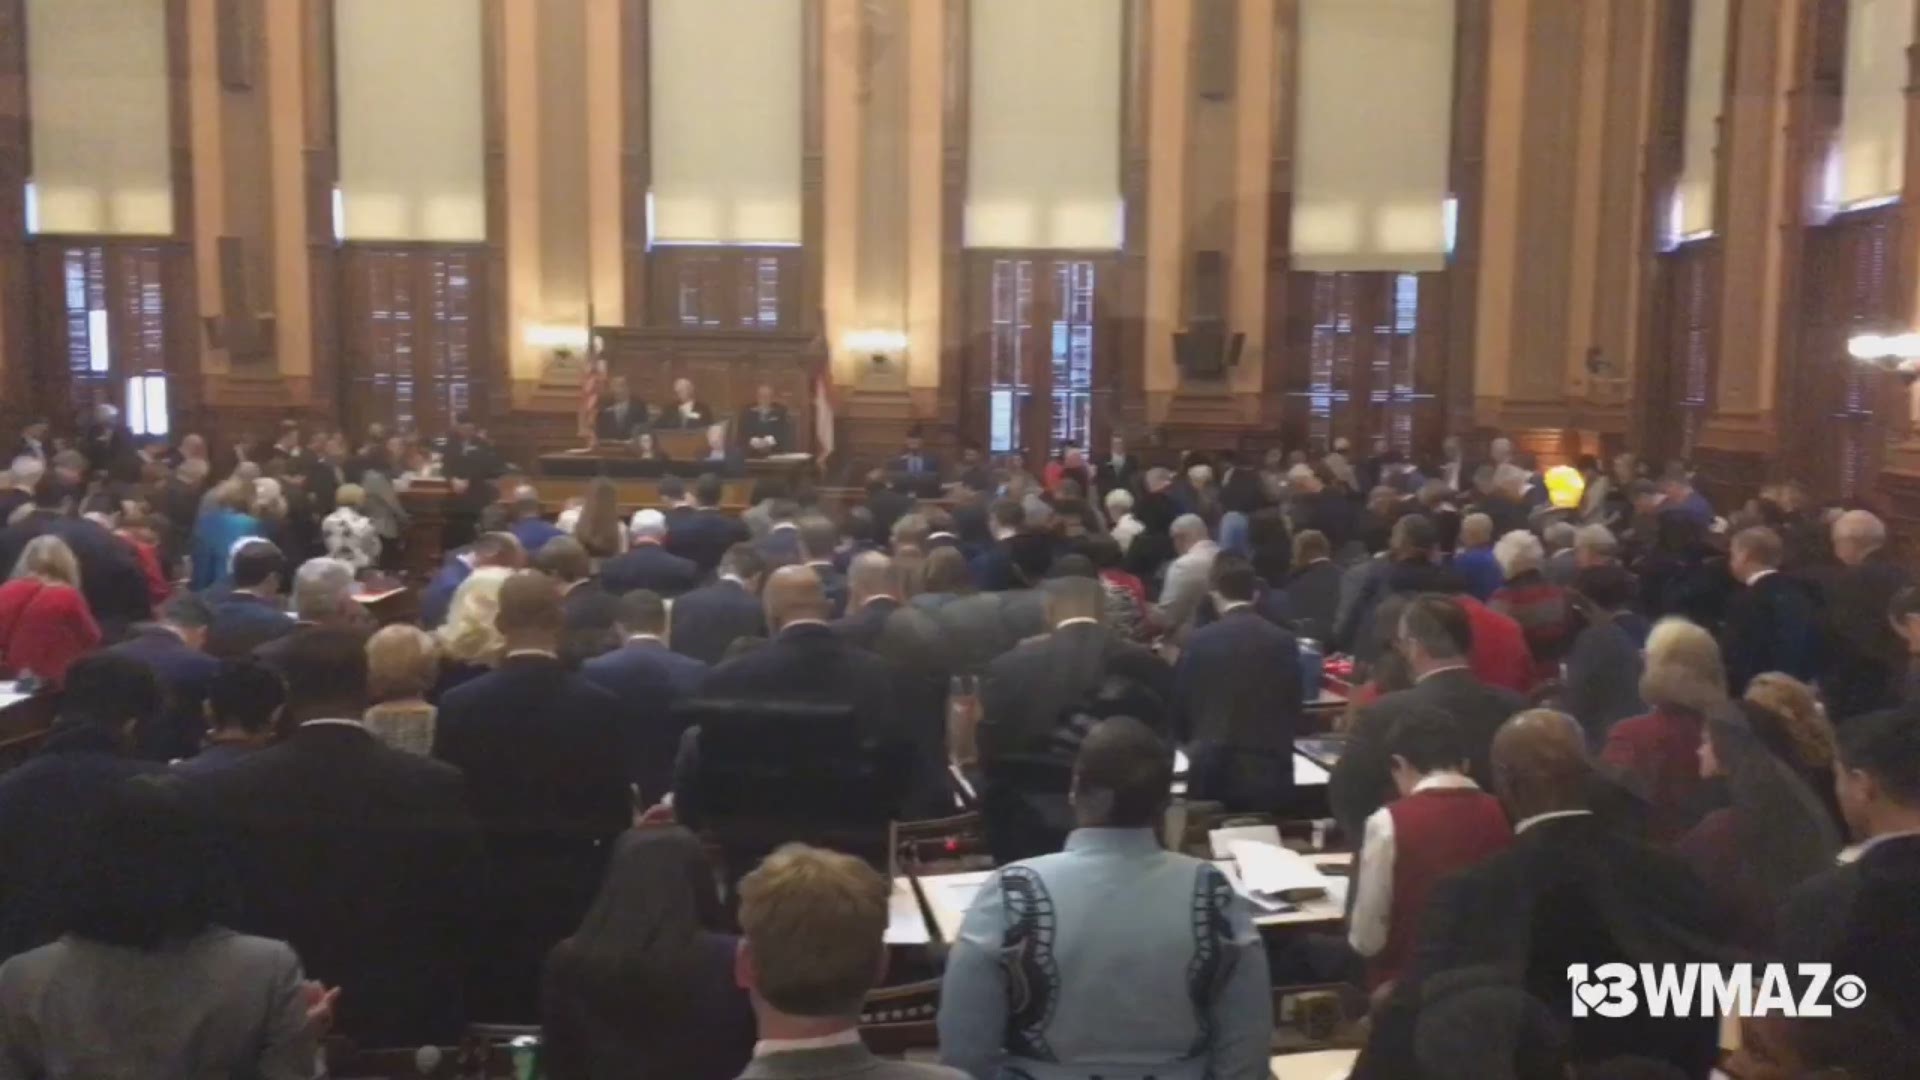 It's the first day of the 2019 legislative session in Georgia